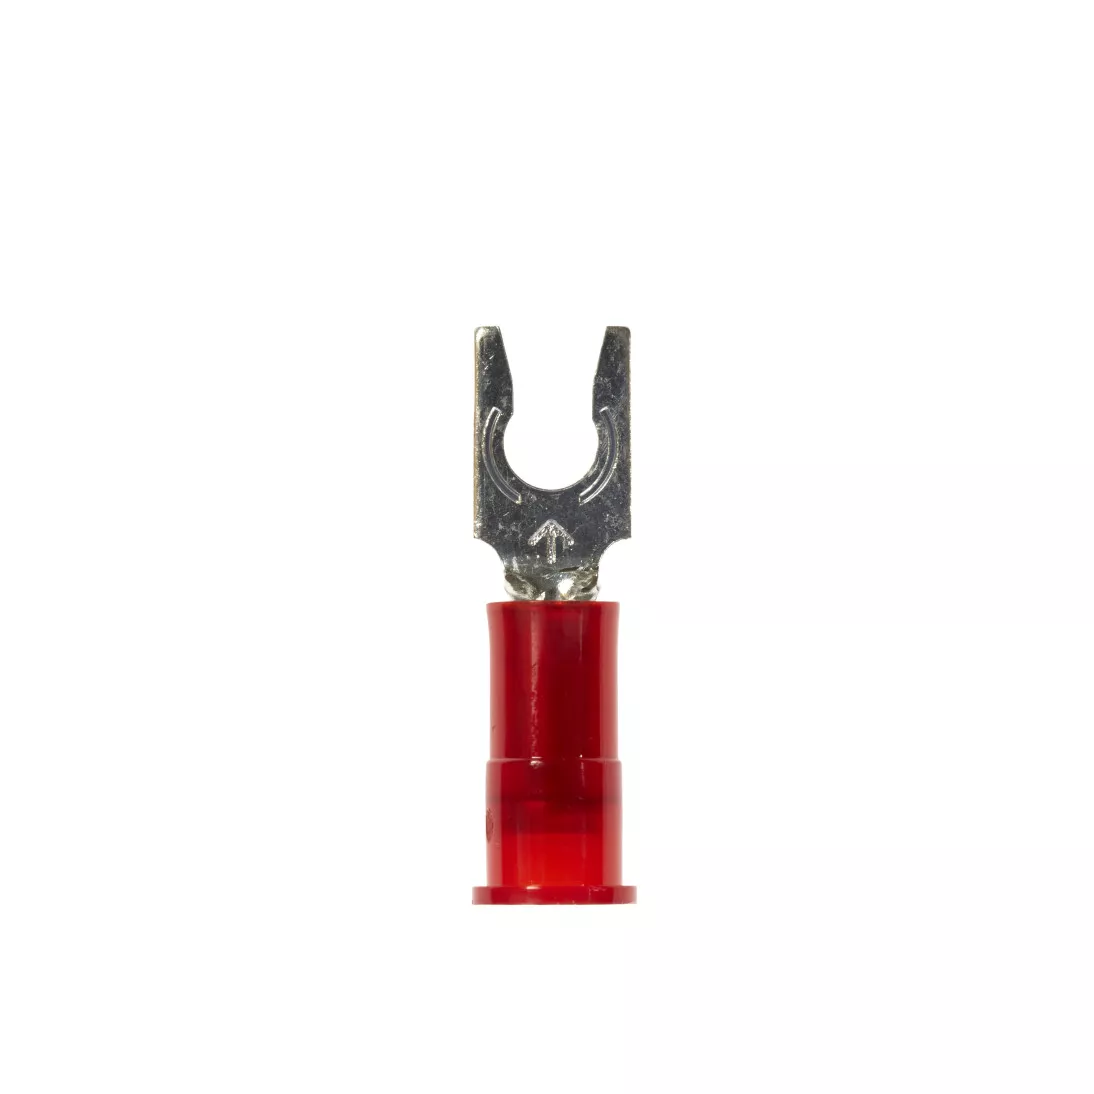 3M™ Scotchlok™ Locking Fork Nylon Insulated, 100/bottle, MNG18-6FLX,
spring-like tongue firmly fits around the stud, 500/Case